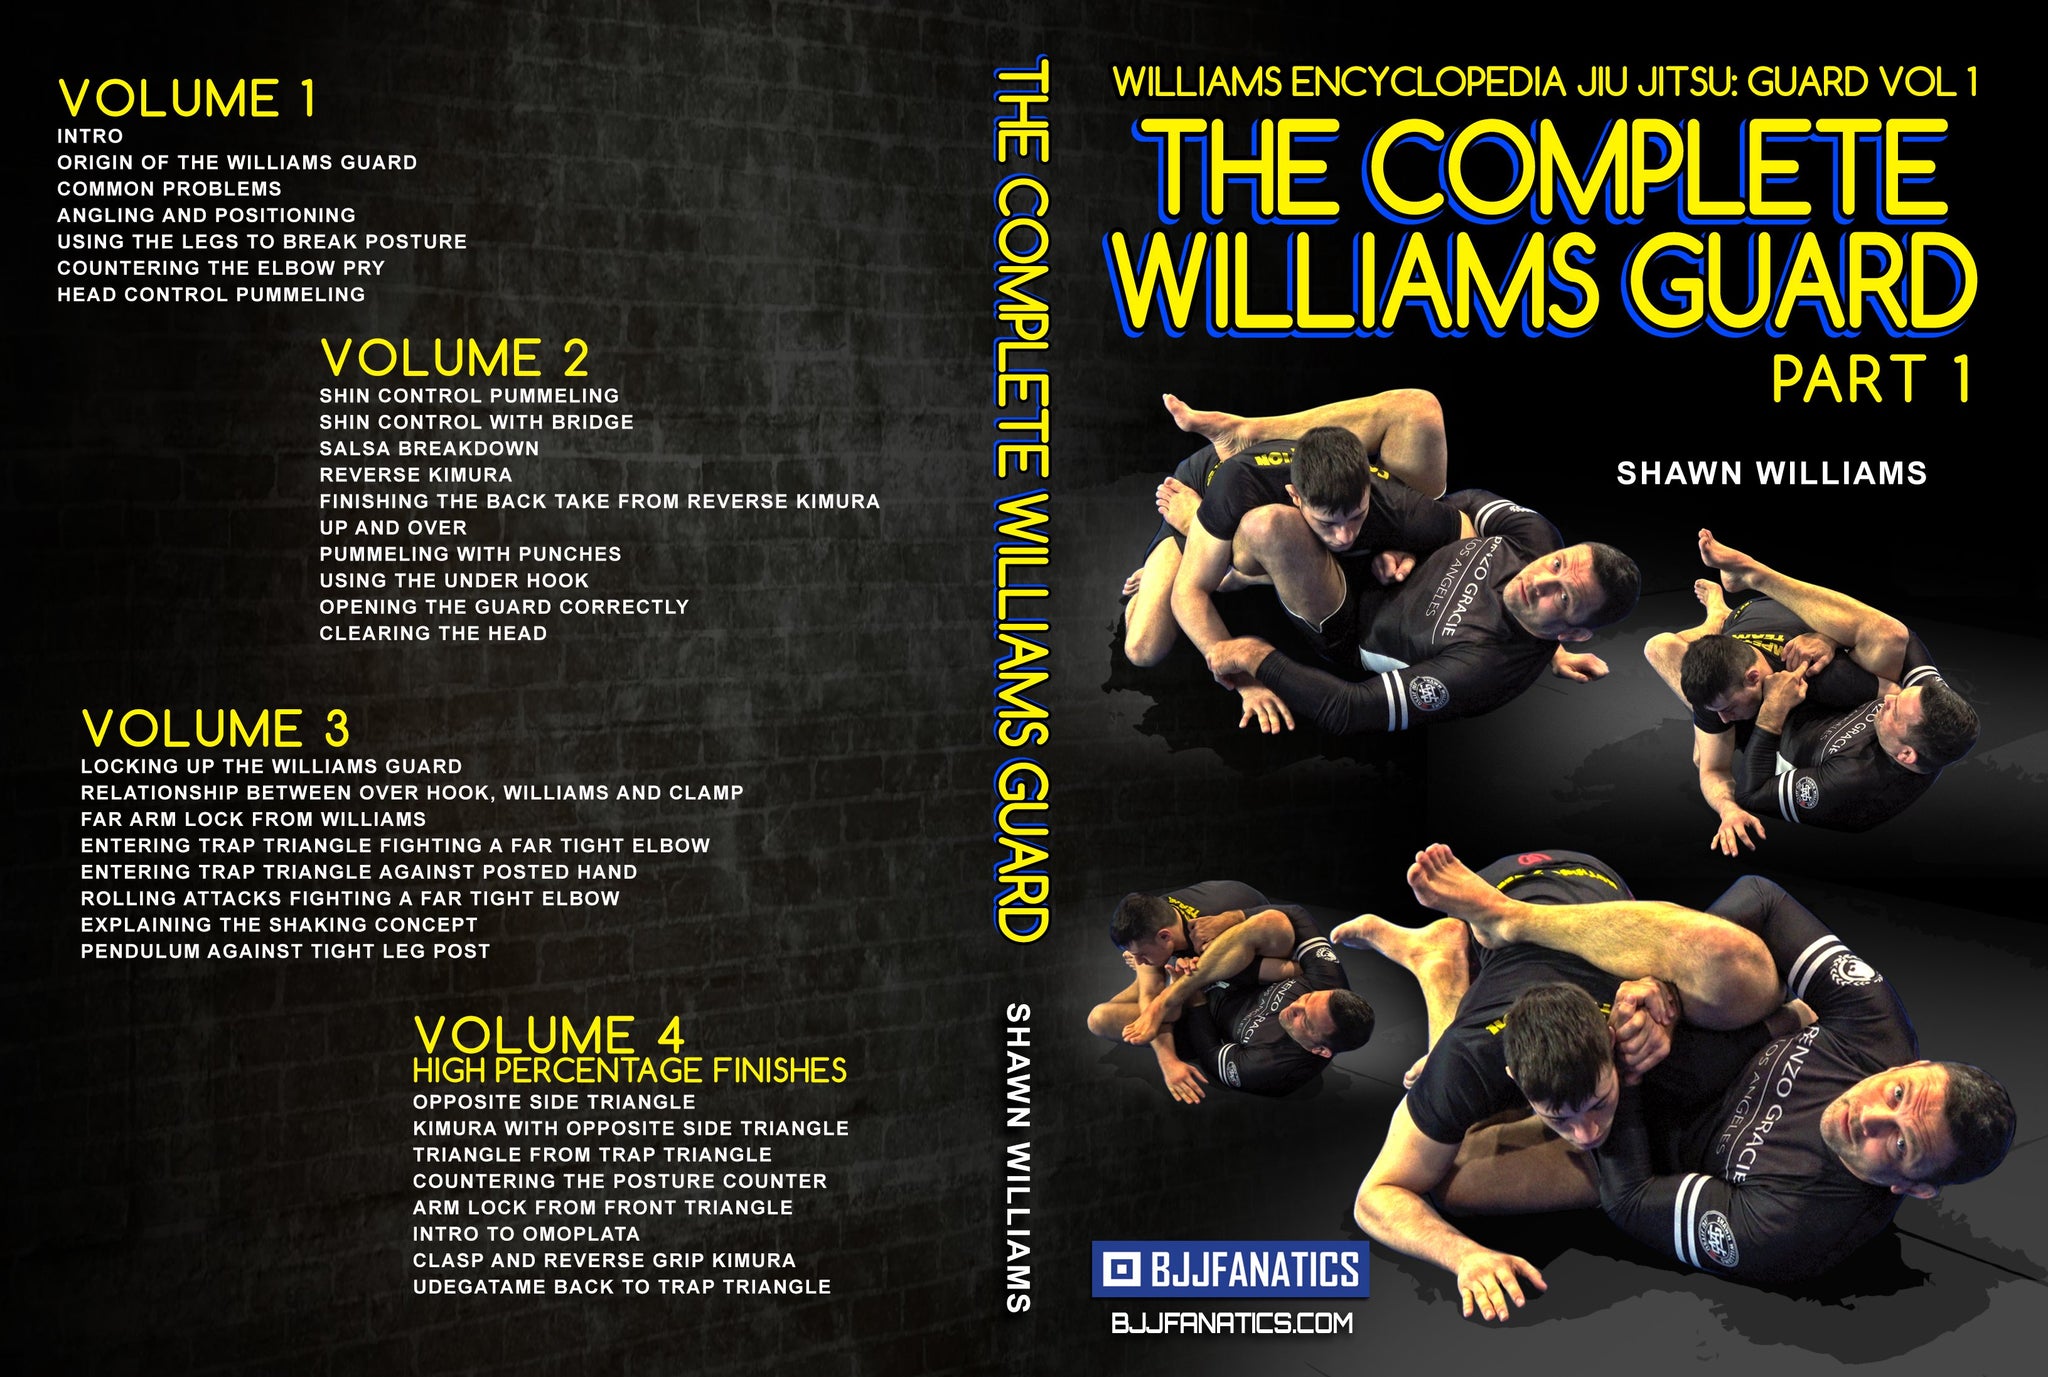 The Complete Williams Guard by Shawn Williams